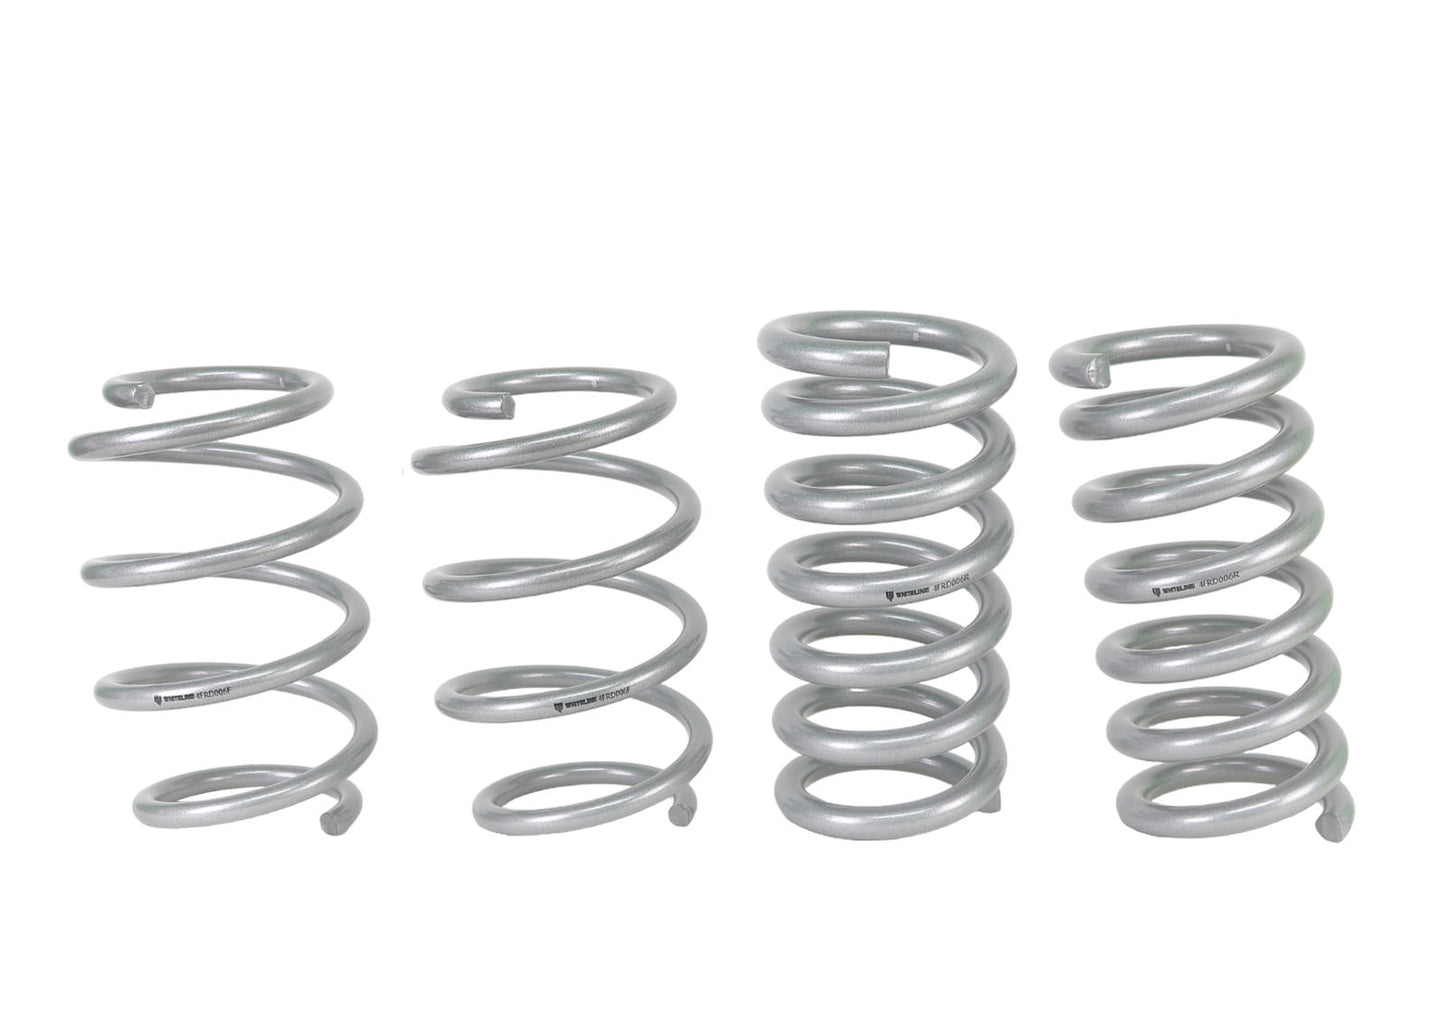 Performance Lowering Spring Kit Ford Mustang S550 GT 2014-2019